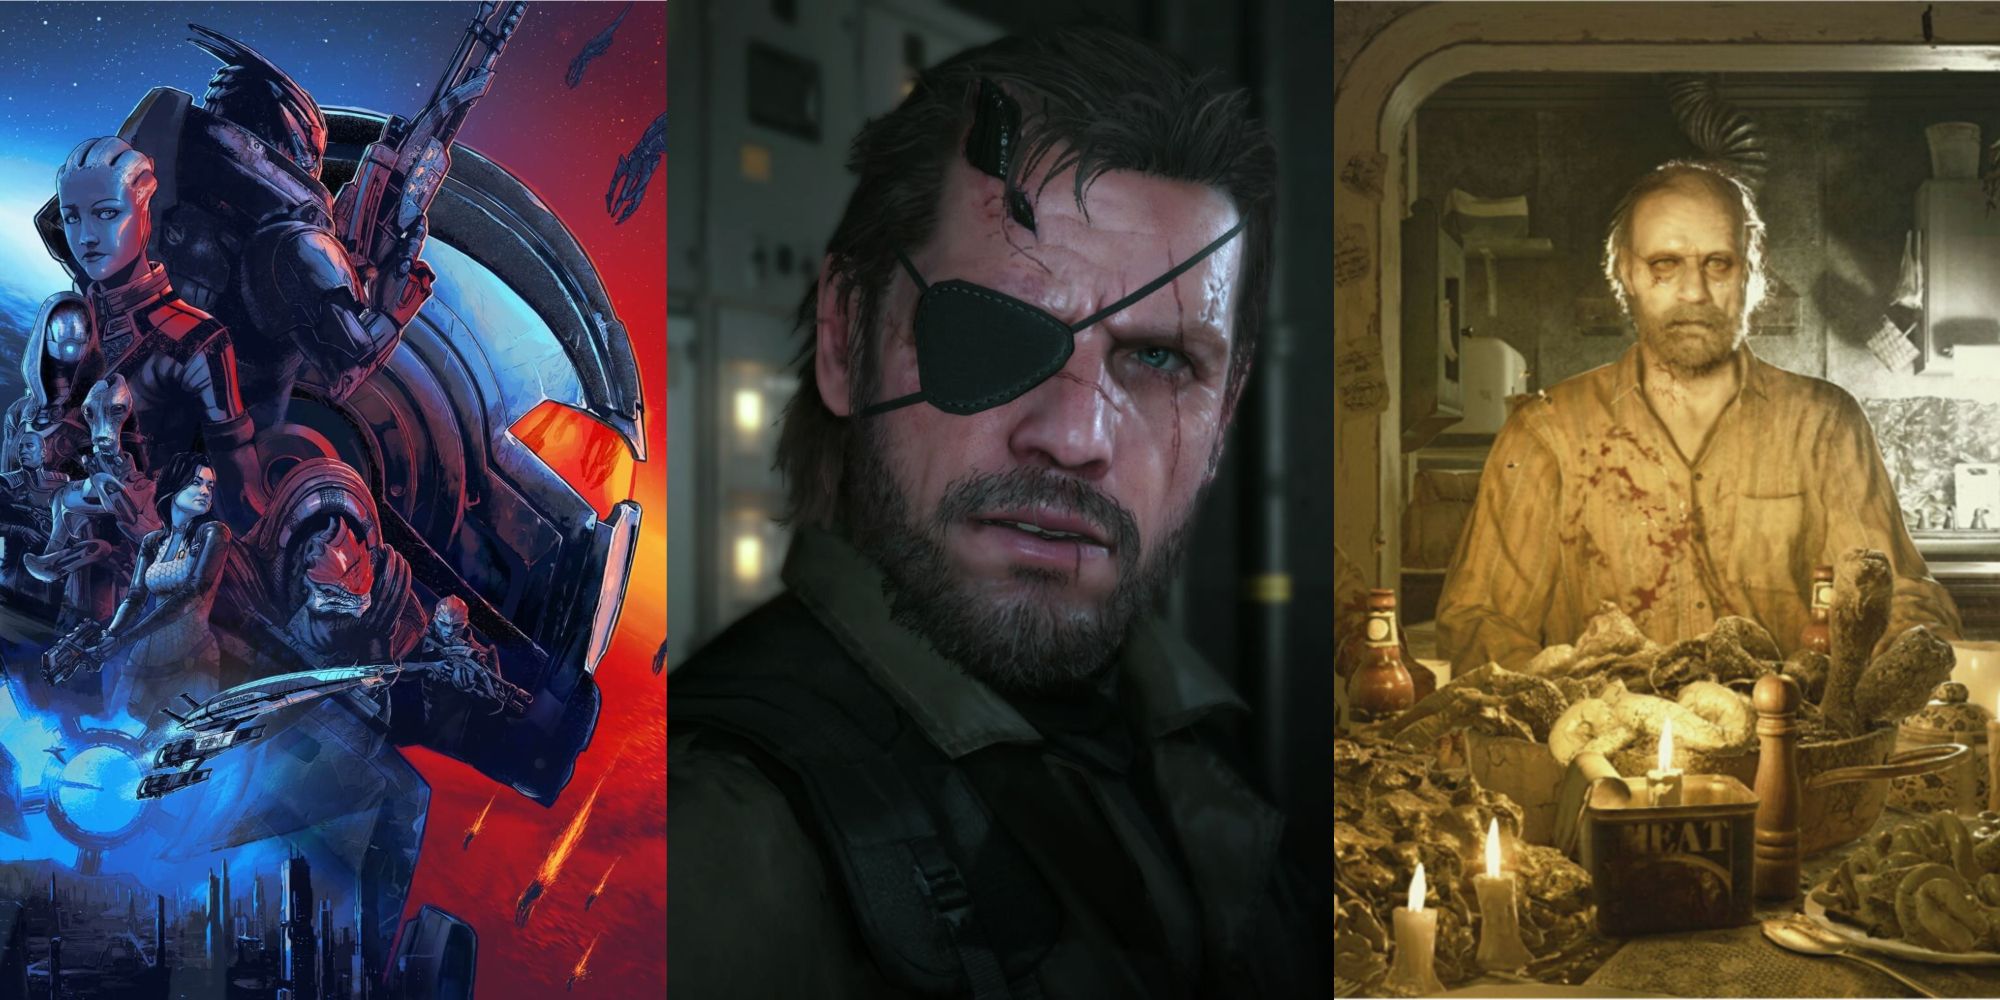 Games Ruined by One Moment - Mass Effect art work, Big Boss in Metal gear Solid 5 and the Baker Family in Resident Evil 7